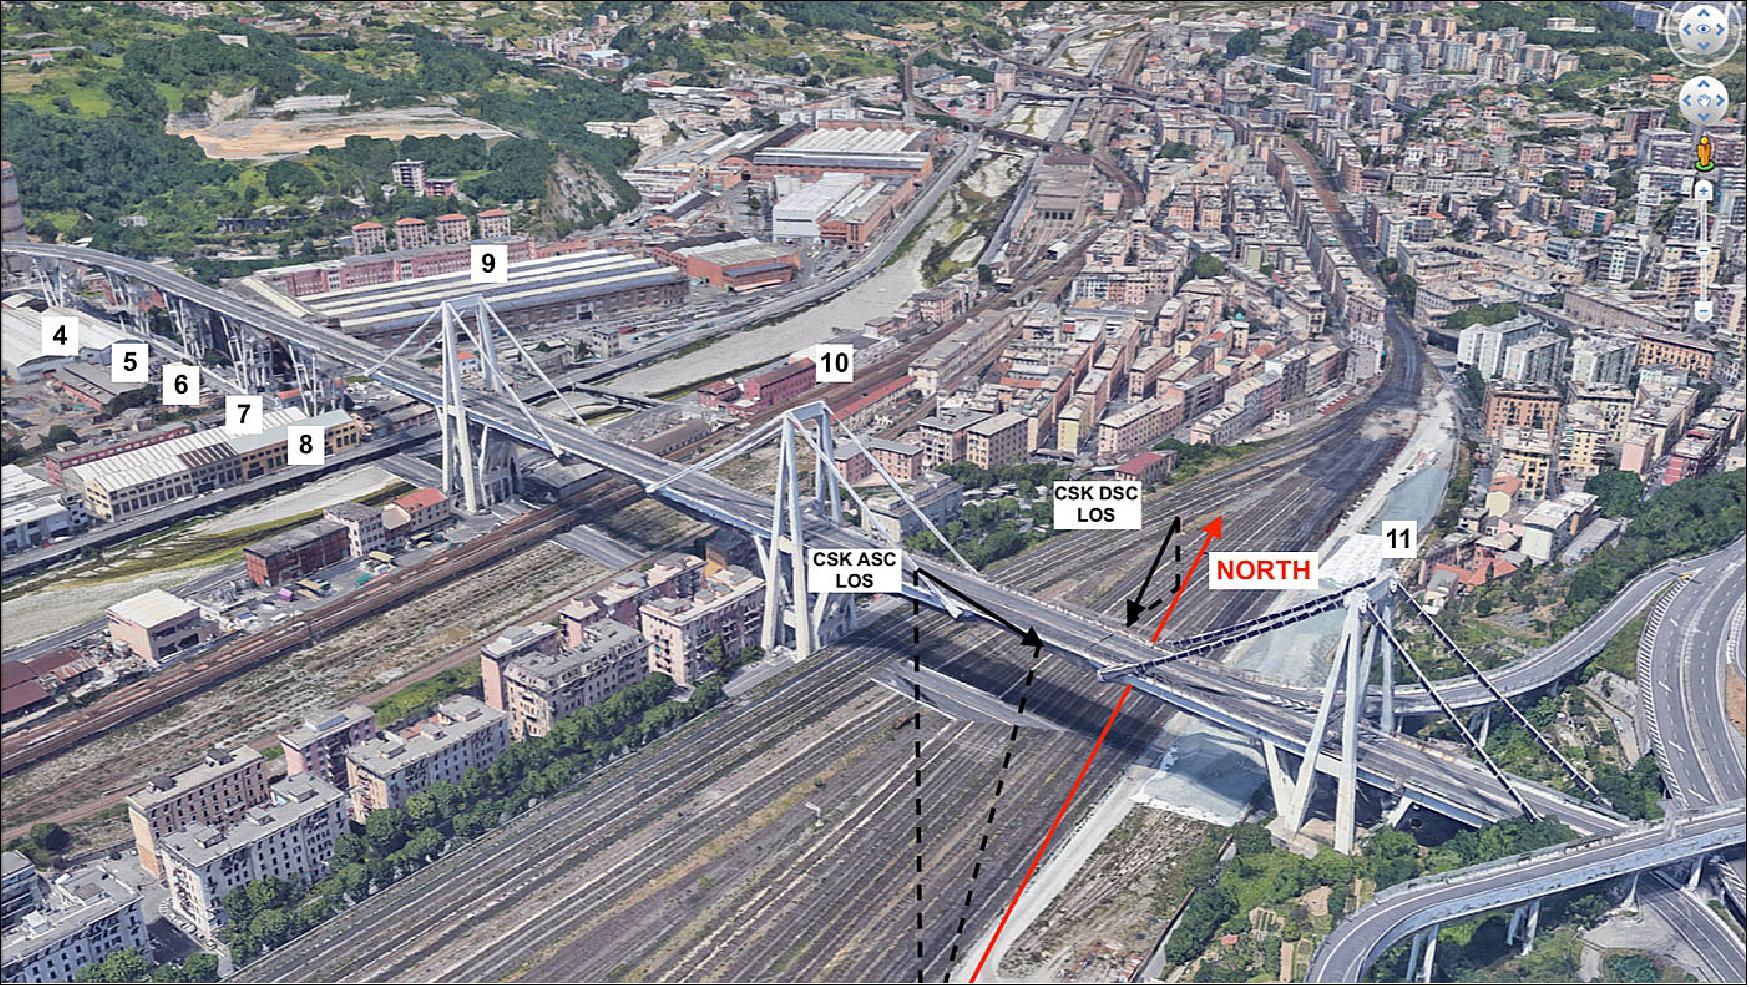 Figure 51: A satellite view of the Morandi Bridge in Genoa, Italy, prior to its August 2018 collapse. The numbers identify key bridge components. Numbers 4 through 8 correspond to the bridge's V-shaped piers (from West to East). Numbers 9 through 11 correspond to three independent balance systems on the bridge. In the annotated version, the black arrows identify areas of change based on data from the Cosmo-SkyMed satellite constellation (image credit: NASA/JPL-Caltech/Google)